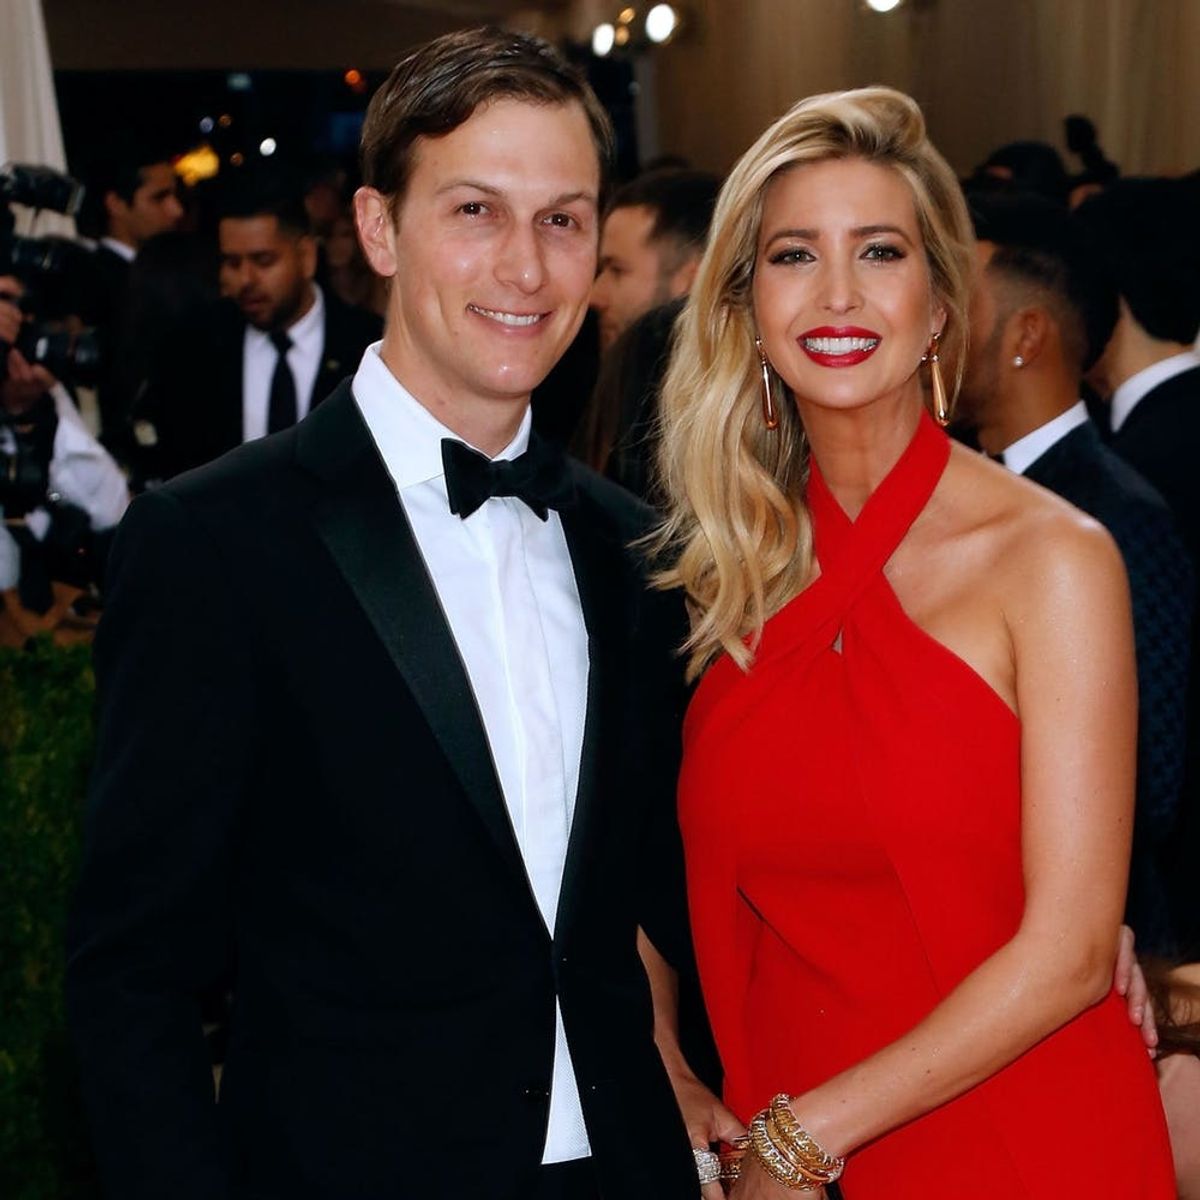 Ivanka Trump and Jared Kushner Just Stood Up for LGBTQ and Women’s Rights by Speaking Out Against This Proposed Order